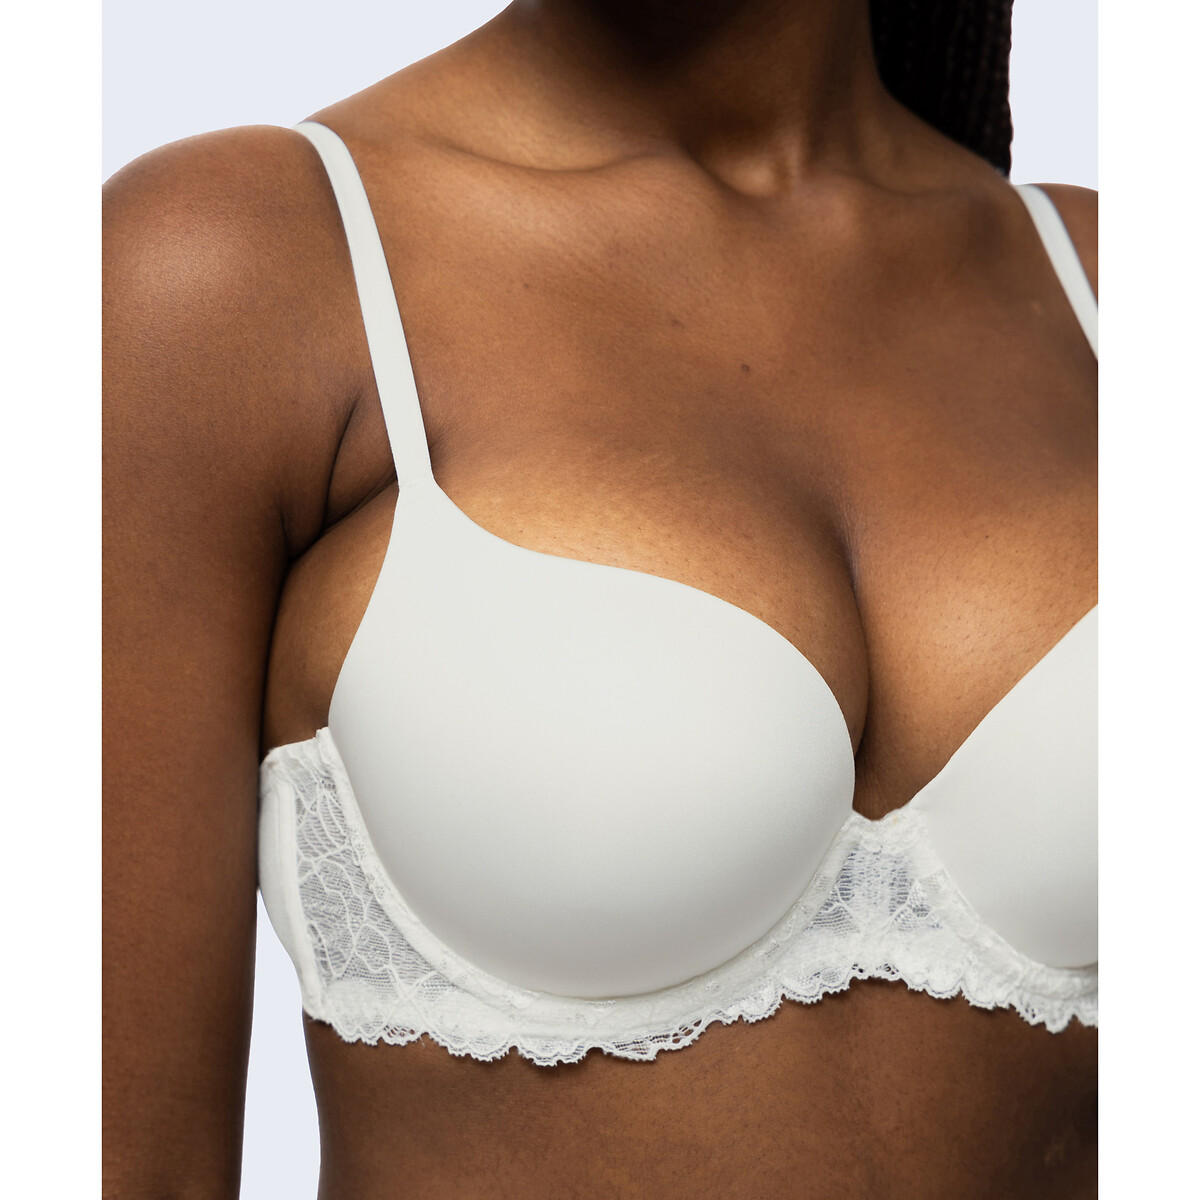 Our Products: Super Push Up Bra, Cup B, DORINA